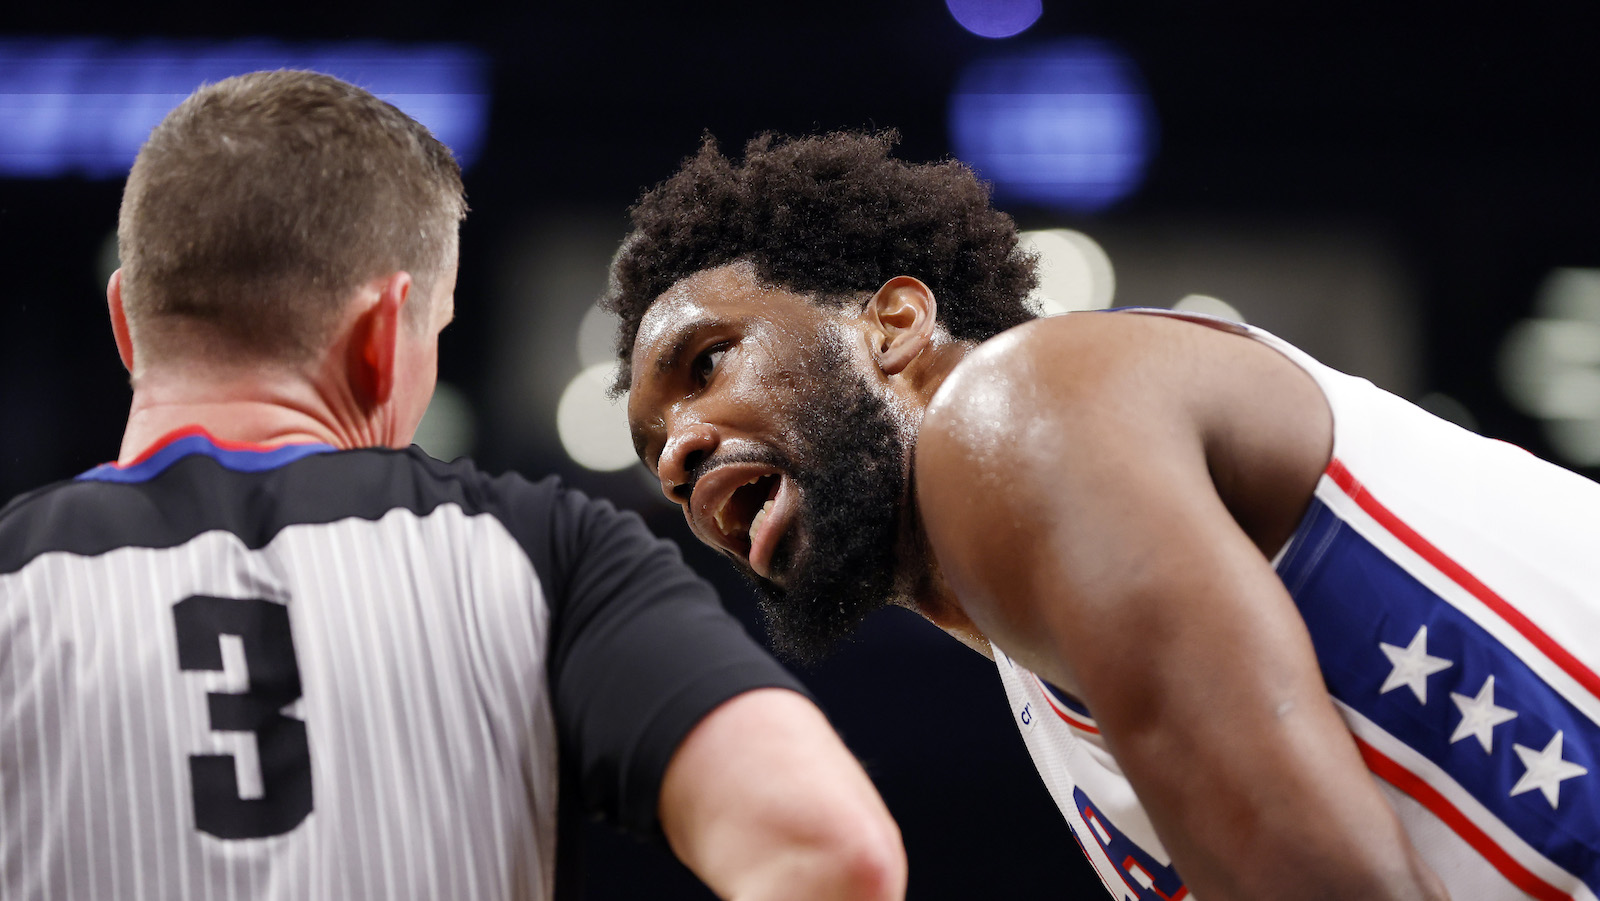 NEW YORK, NEW YORK - APRIL 20: Joel Embiid #21 of the Philadelphia 76ers reacts toward referee Nick Buchert #3 against the Brooklyn Nets during the second half of Game Three of the Eastern Conference First Round Playoffs at Barclays Center on April 20, 2023 in the Brooklyn borough of New York City. The 76ers won 102-97. NOTE TO USER: User expressly acknowledges and agrees that, by downloading and or using this photograph, User is consenting to the terms and conditions of the Getty Images License Agreement.